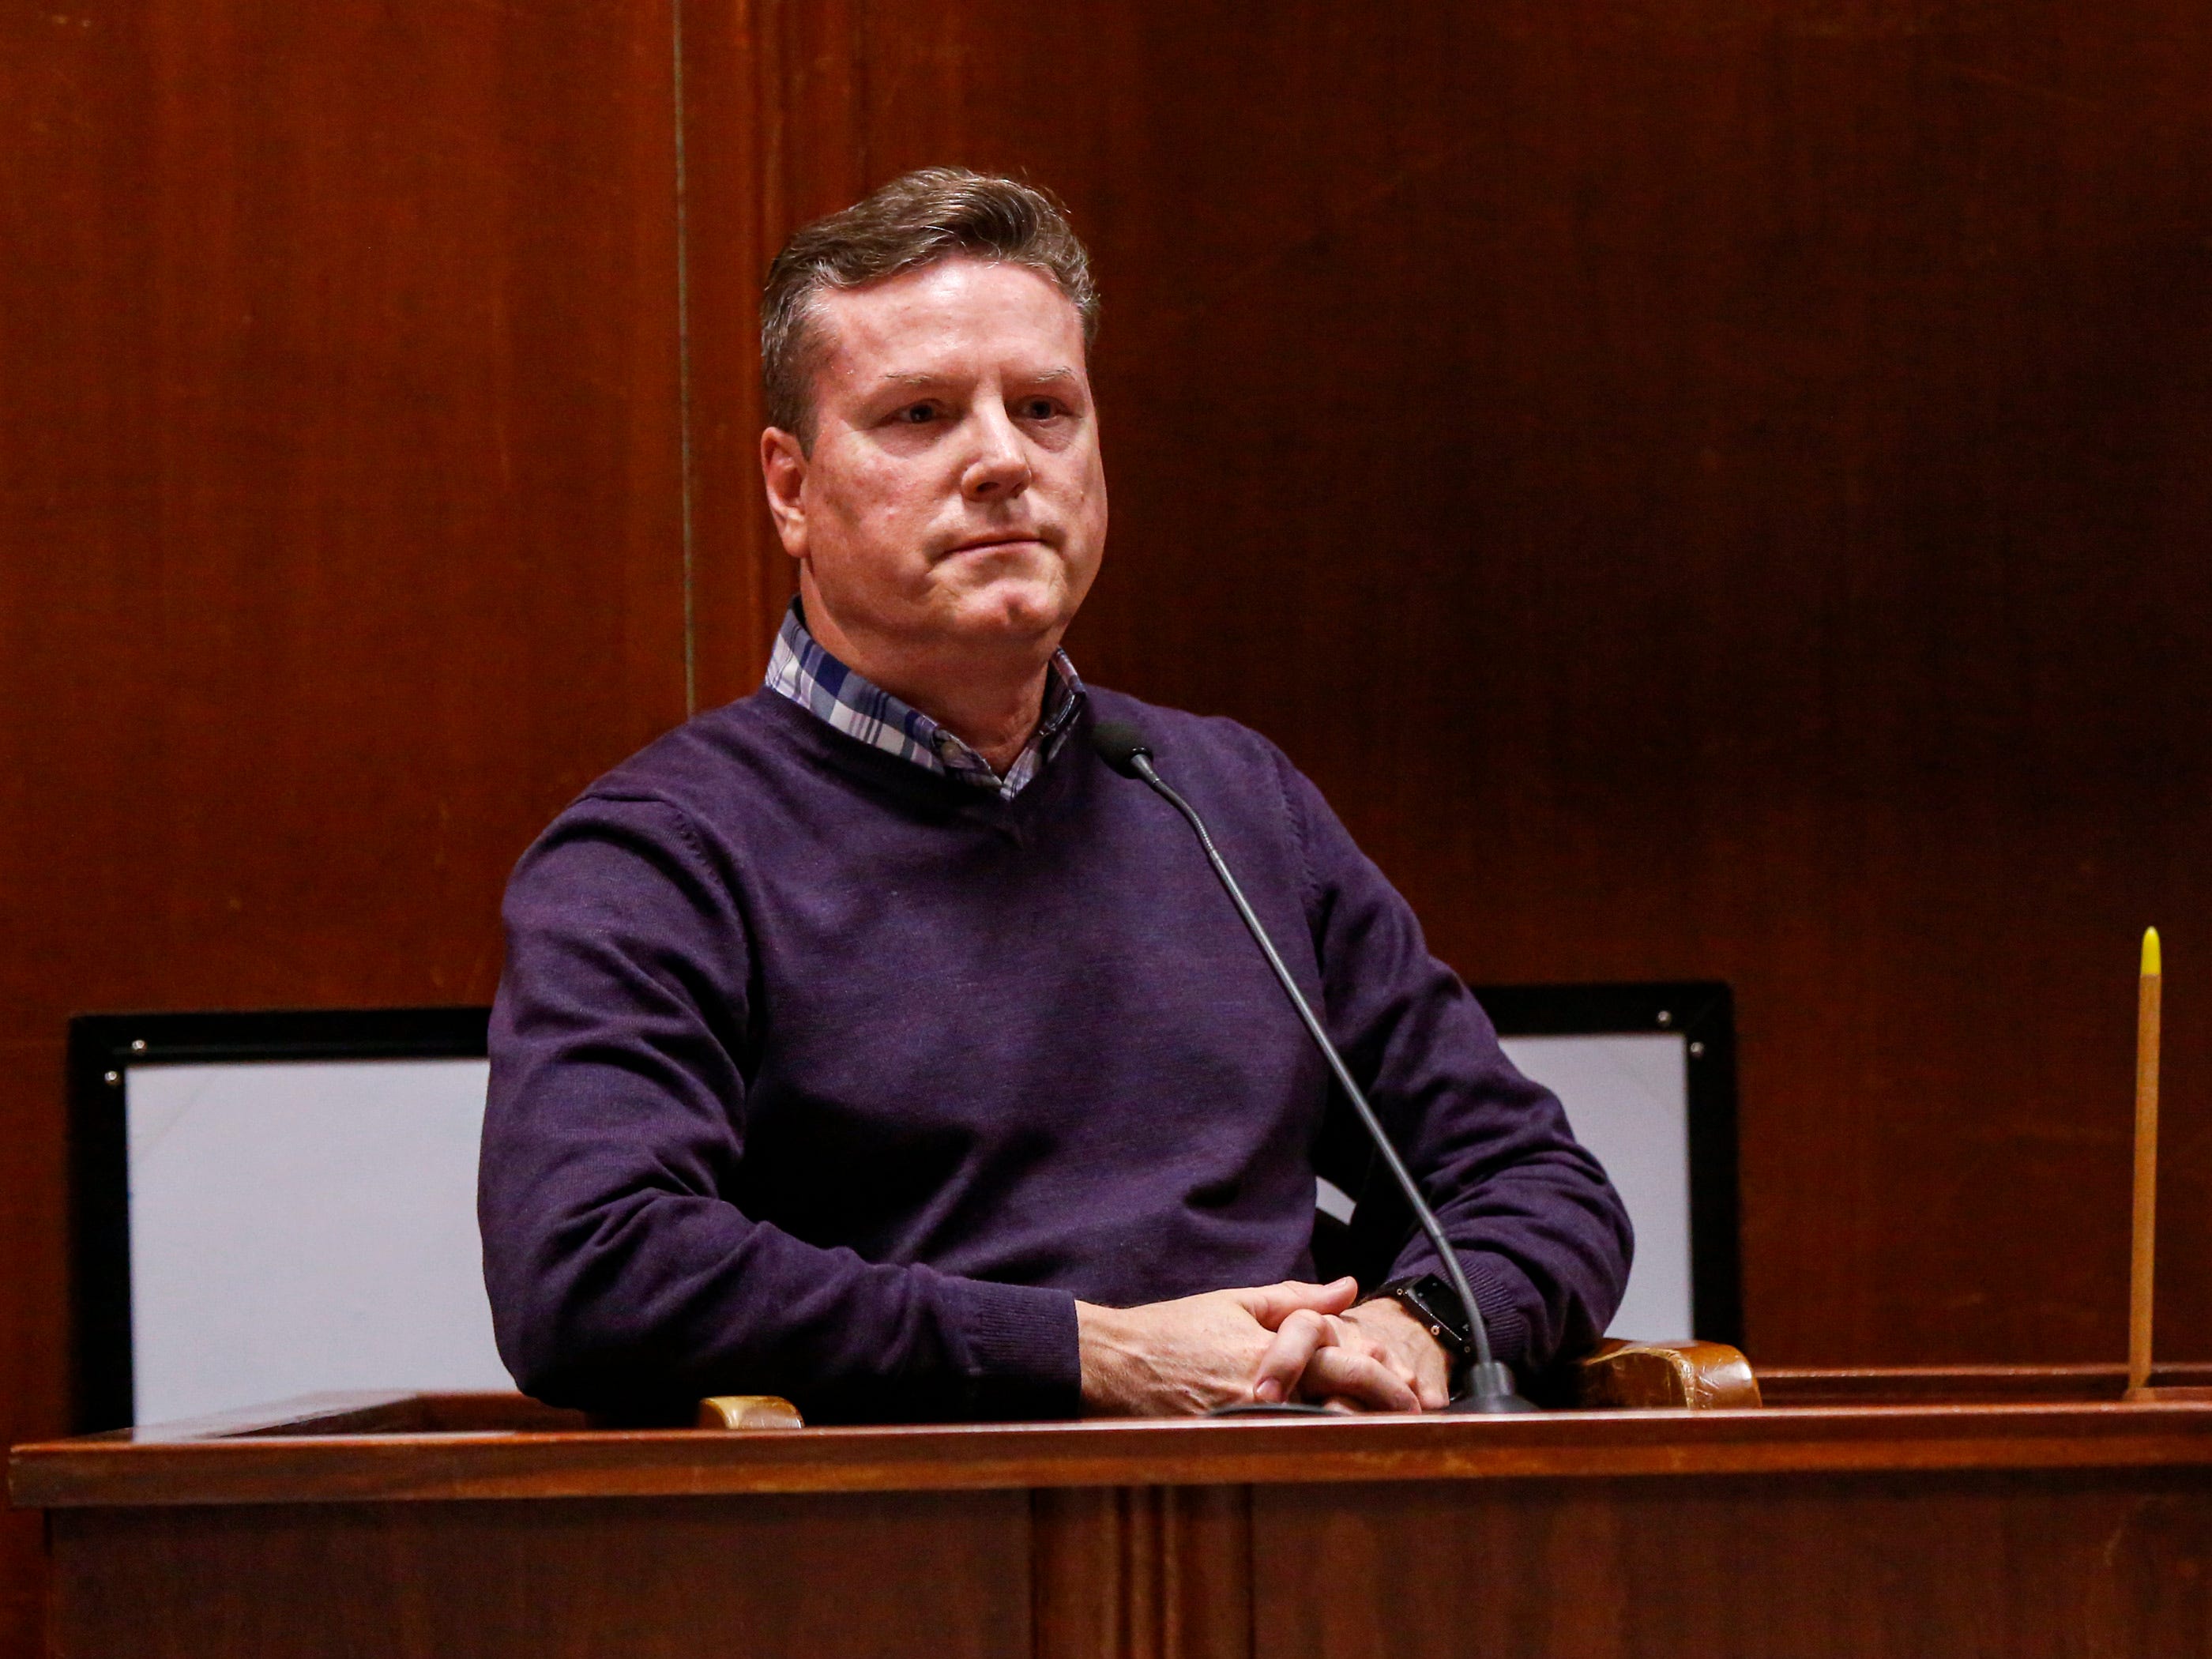 Martin Miller of Jefferson testifies during trial at the Scott County Courthouse in Davenport on Wednesday, Feb. 12, 2020. Miller went to Kennedy High School with Michelle Martinko. Miller was at the choir banquet with Martinko the night she was killed, and also ran into at the Westdale Mall that evening.